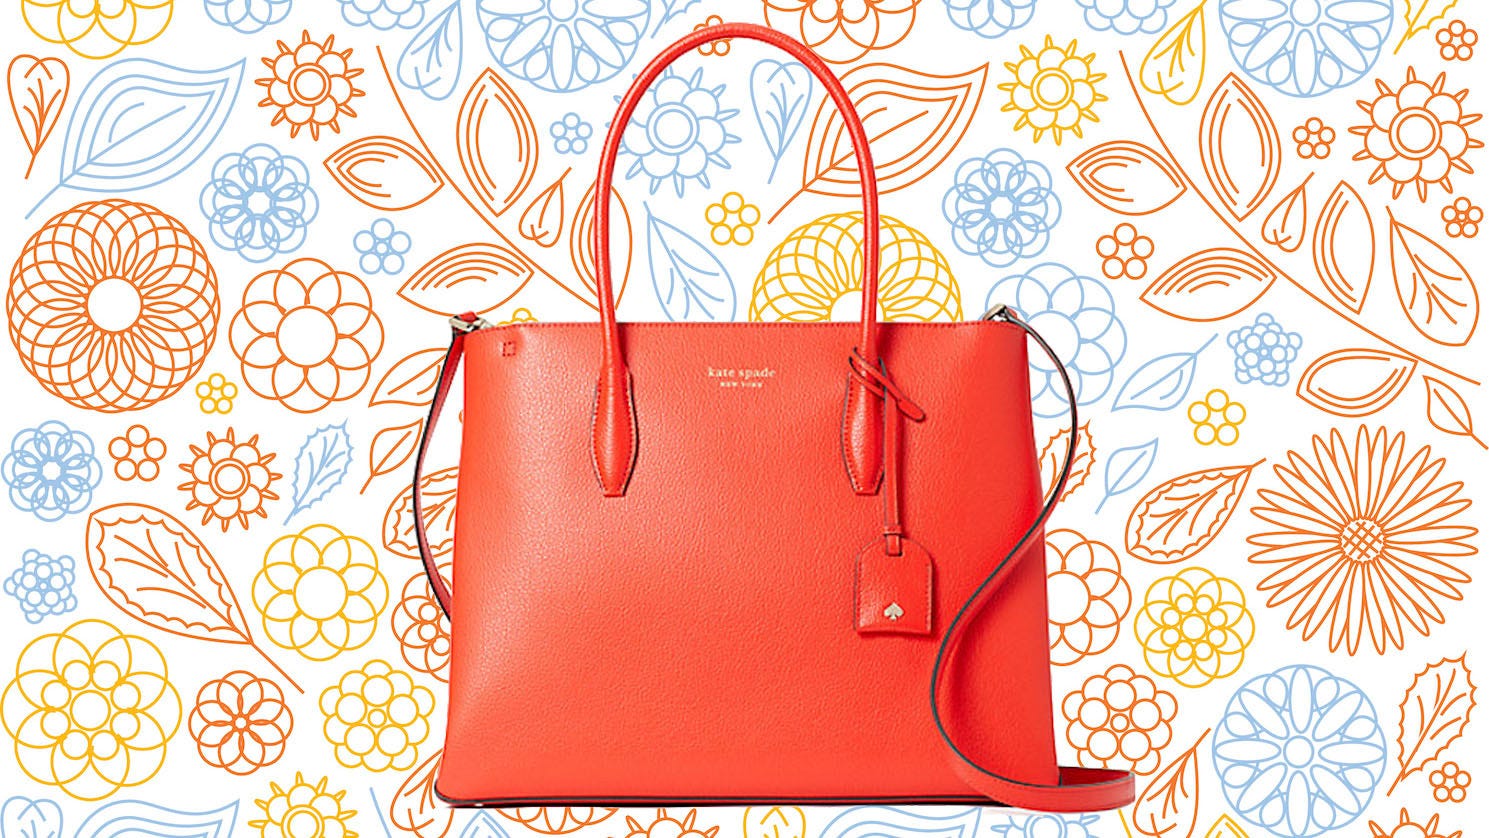 Spade Surprise Sale: Get Kate Spade purses and more at up to off